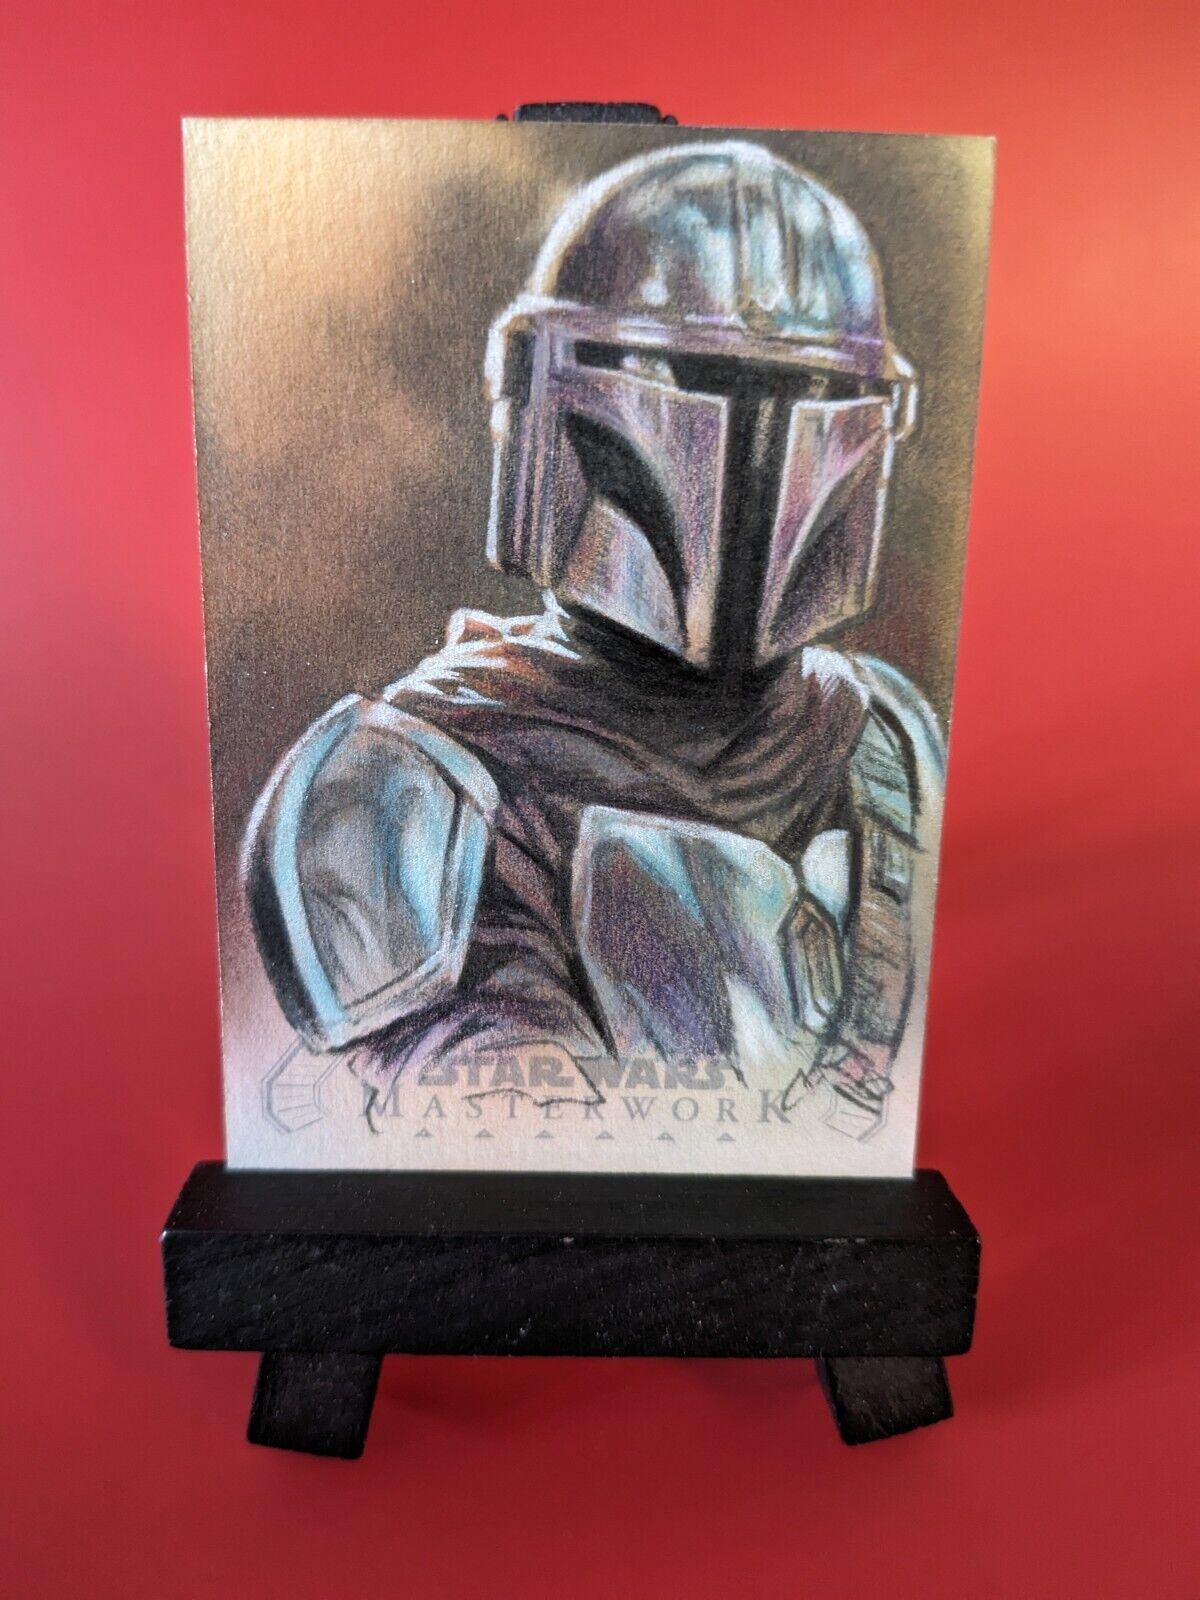 2020 Topps STAR WARS Masterwork Sketch THE MANDALORIAN by Huy Truong